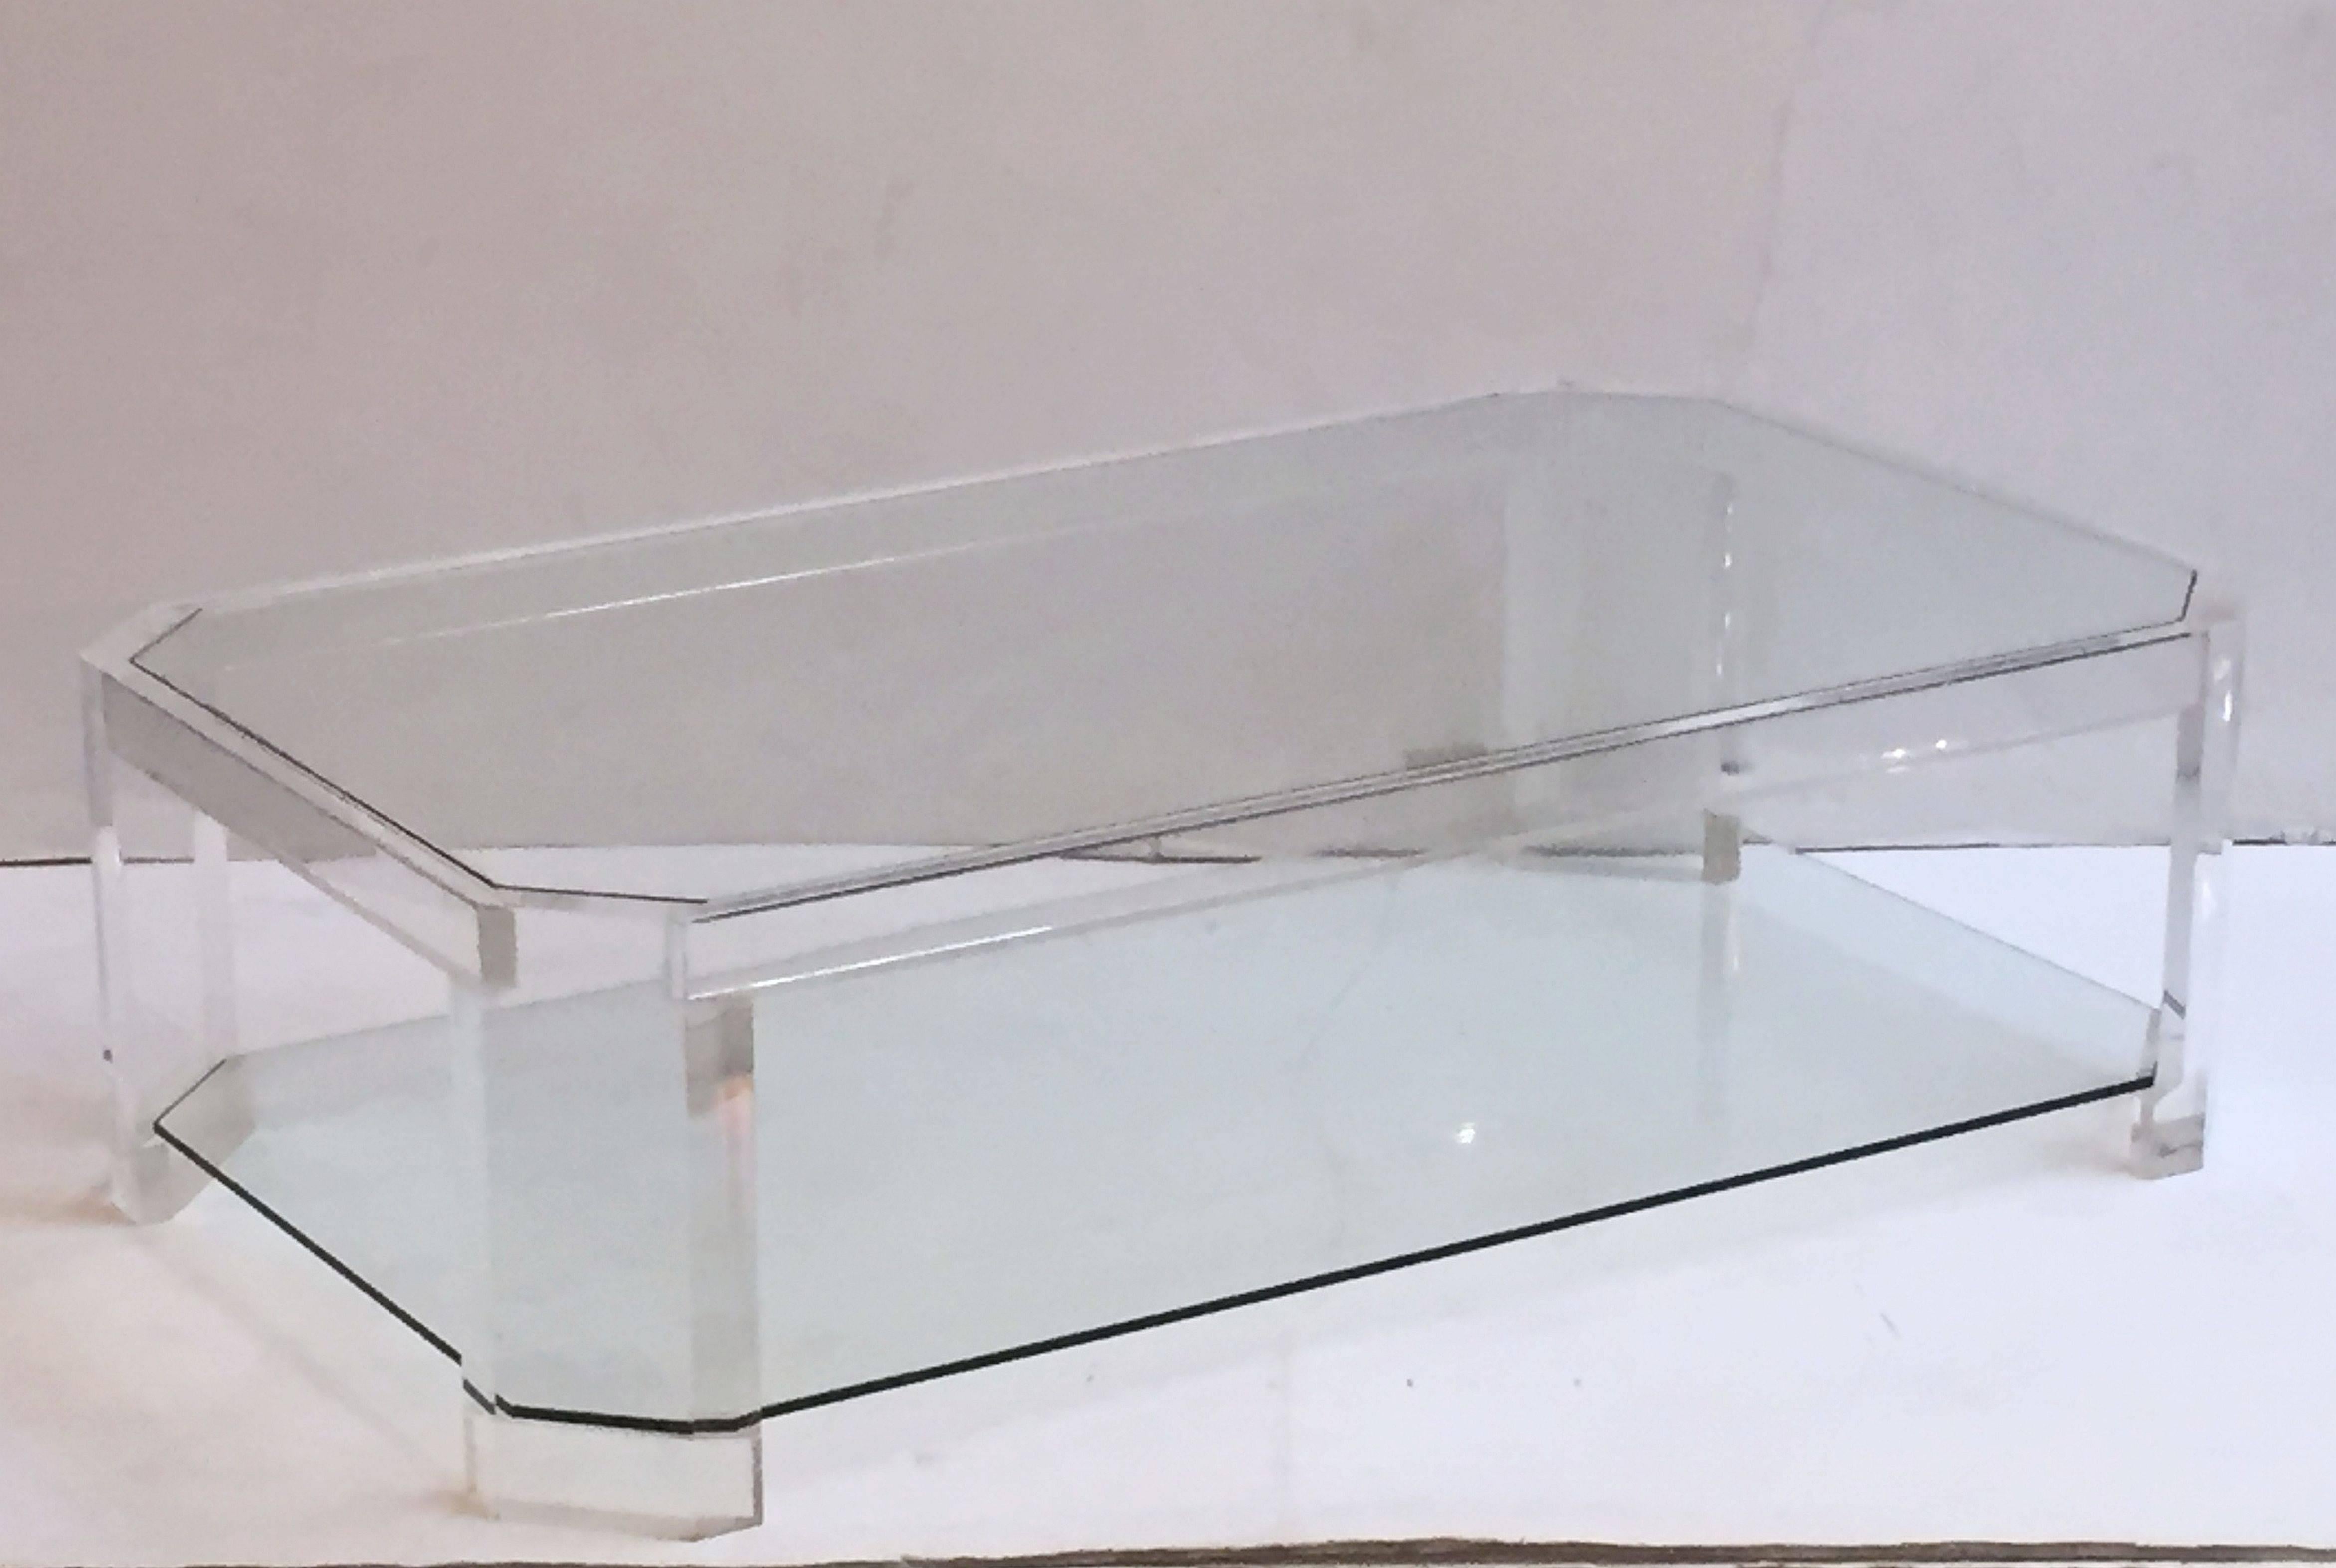 A fine large French rectangular coffee or low cocktail table of Lucite with two inset tiers of glass, with canted corners.

Attributed to David Lange, designer.